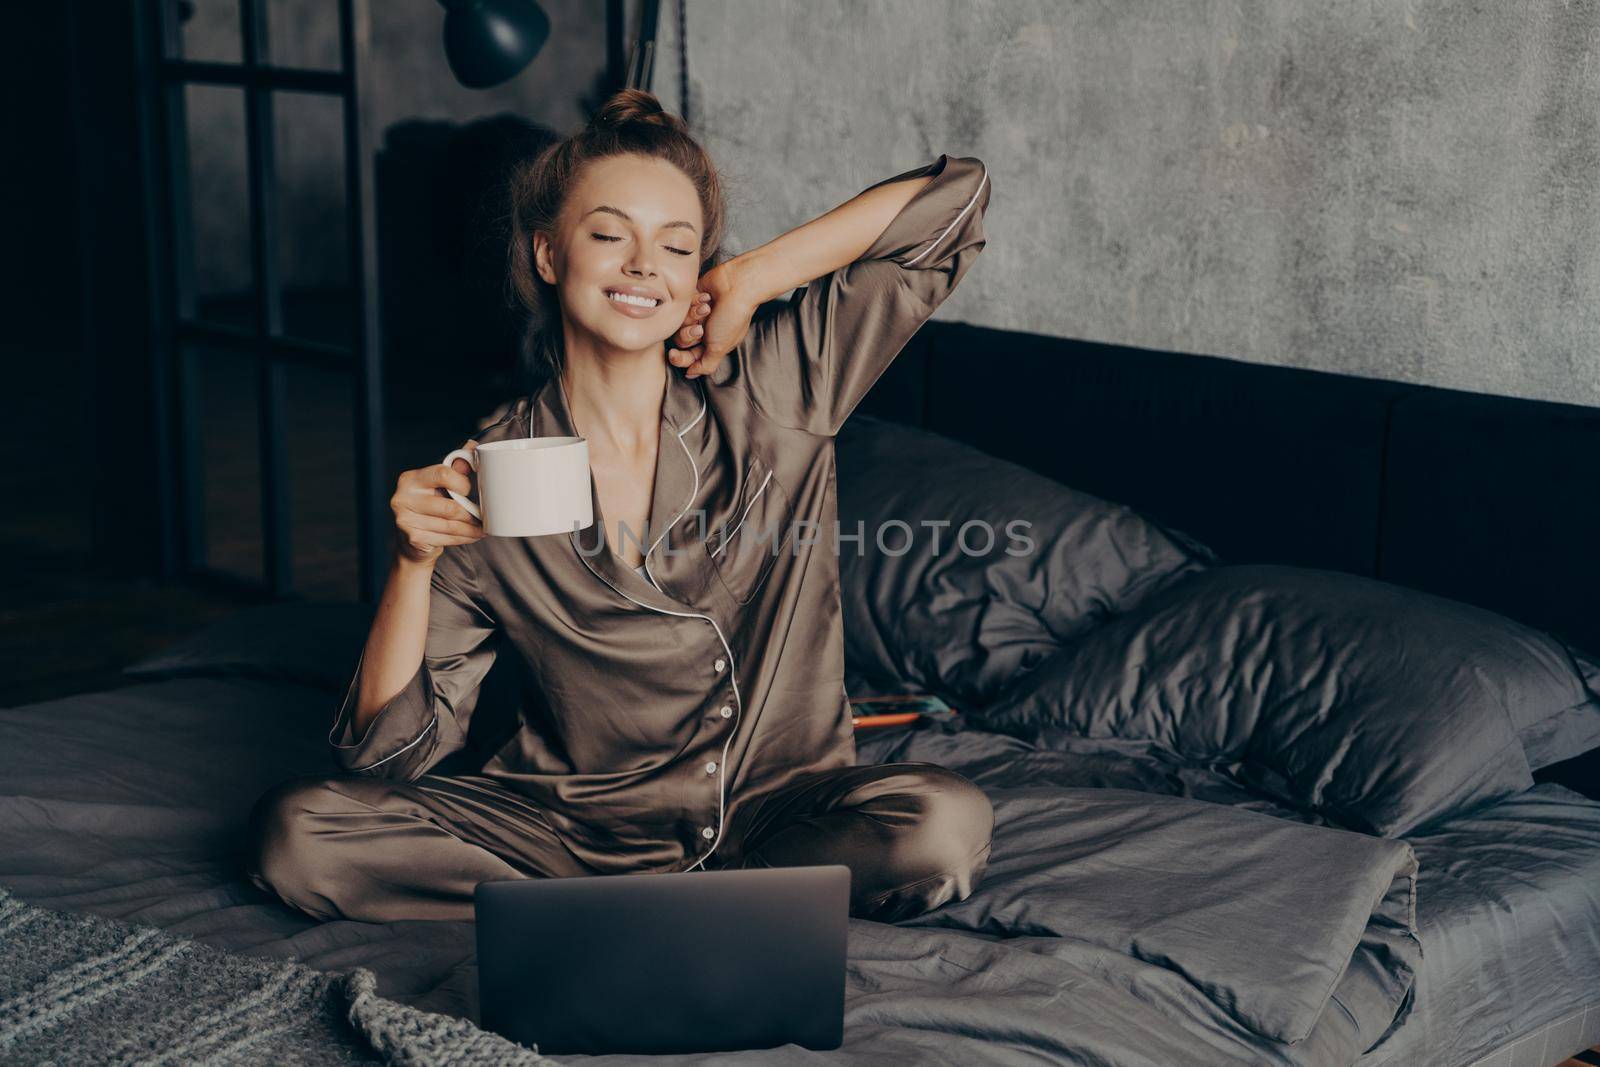 Relaxed female freelancer having cup of coffee stright after waking up in bed while checking new messages and emails on laptop, dressed in pajama. Woman with closed eyes ready to start remote work